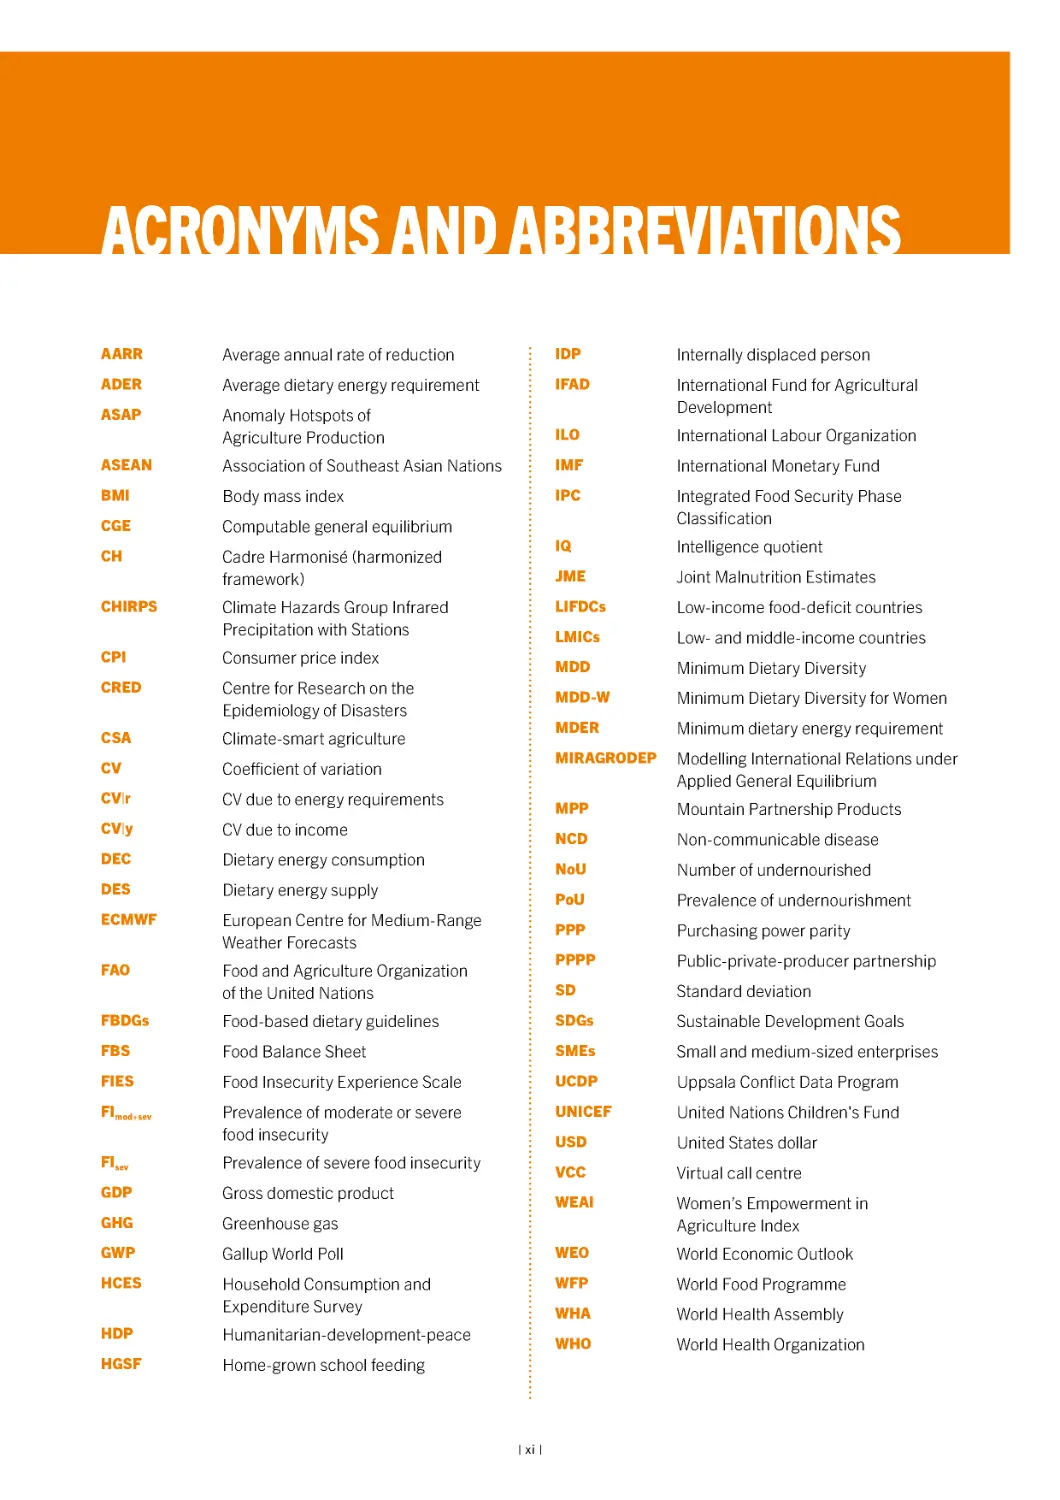 ﻿Acronyms and abbreviation